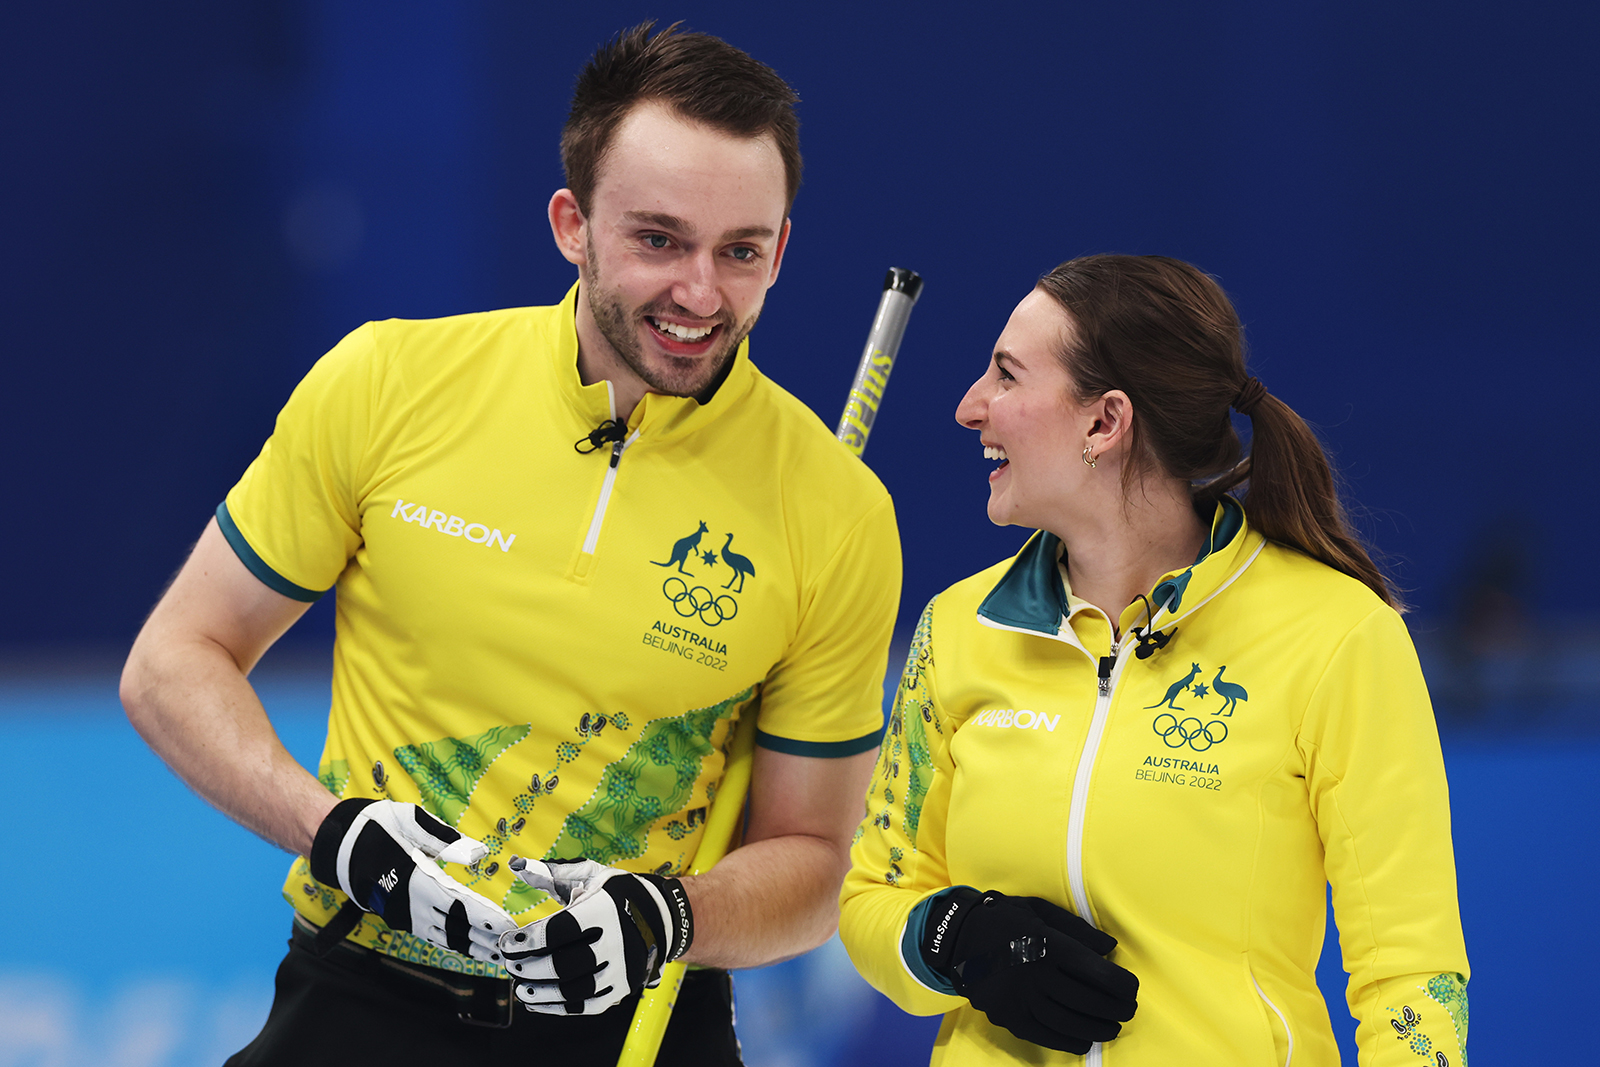 Dean Hewitt and Tahli Gill of Team Australia celebrate their victory against Team Canada during the curling mixed doubles round robin on Day 2 on Sunday.